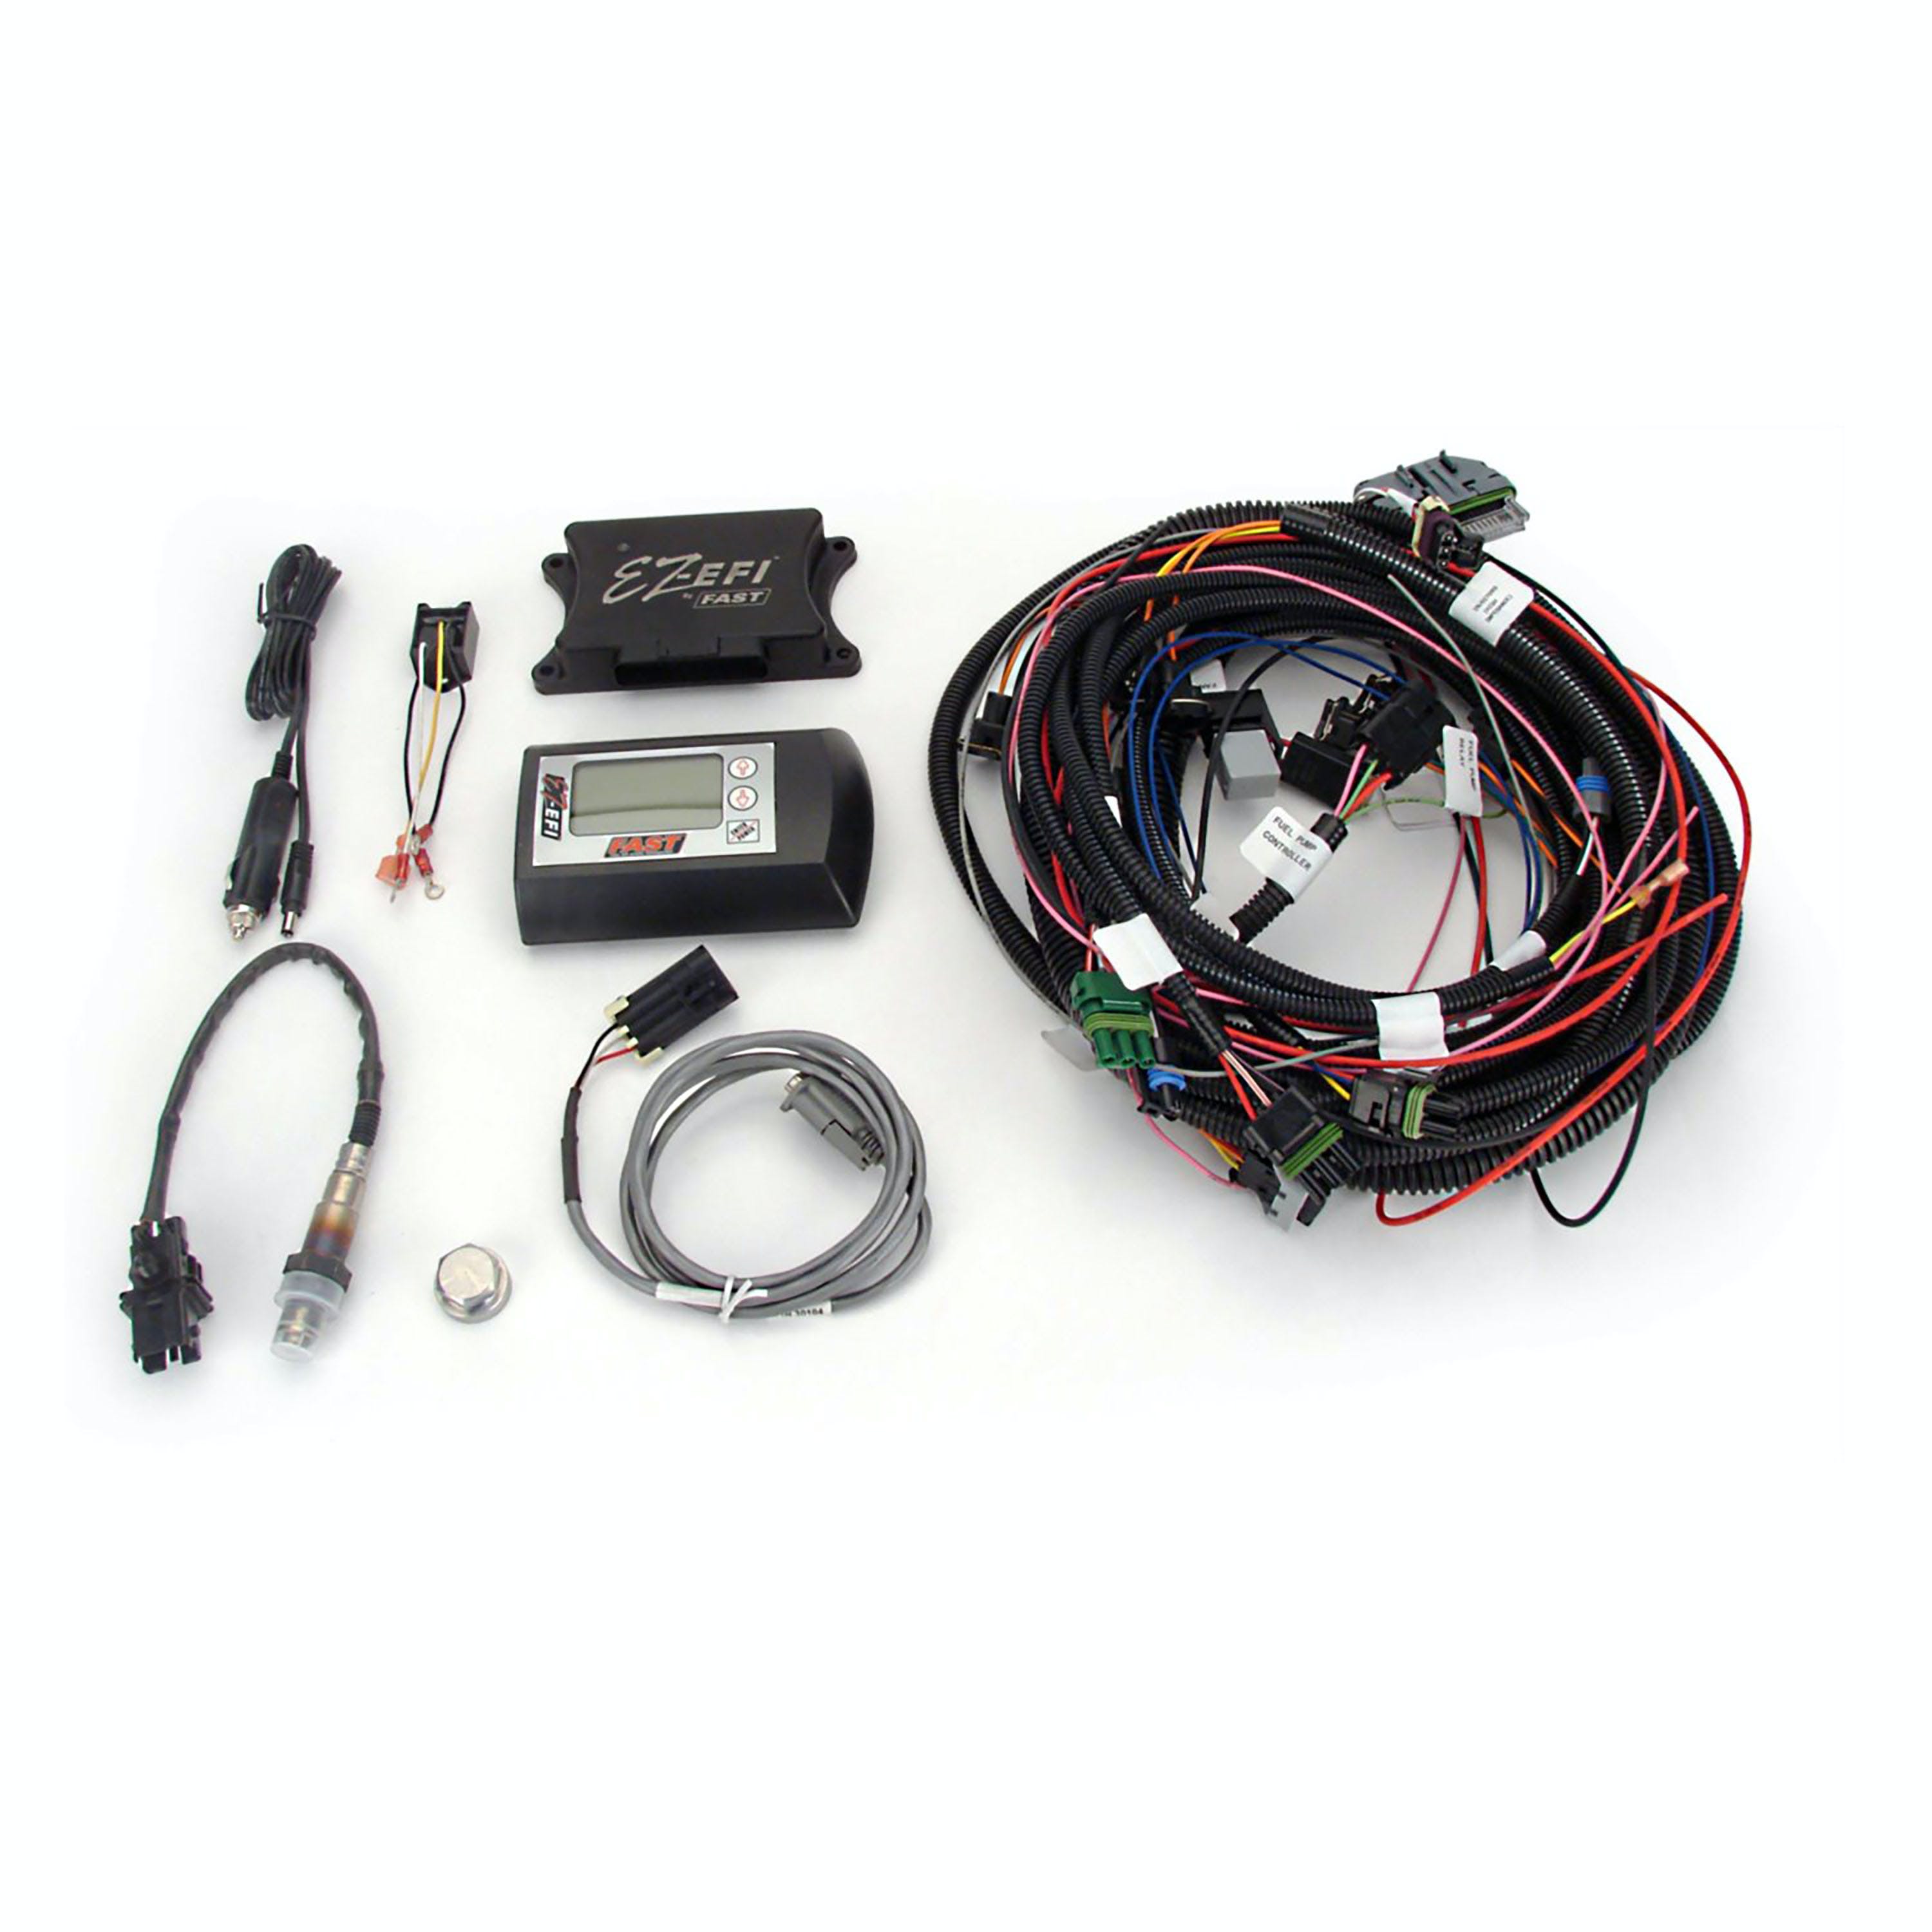 FAST - Fuel Air Spark Technology 302001 EZ EFI Multiport with Flying Leads